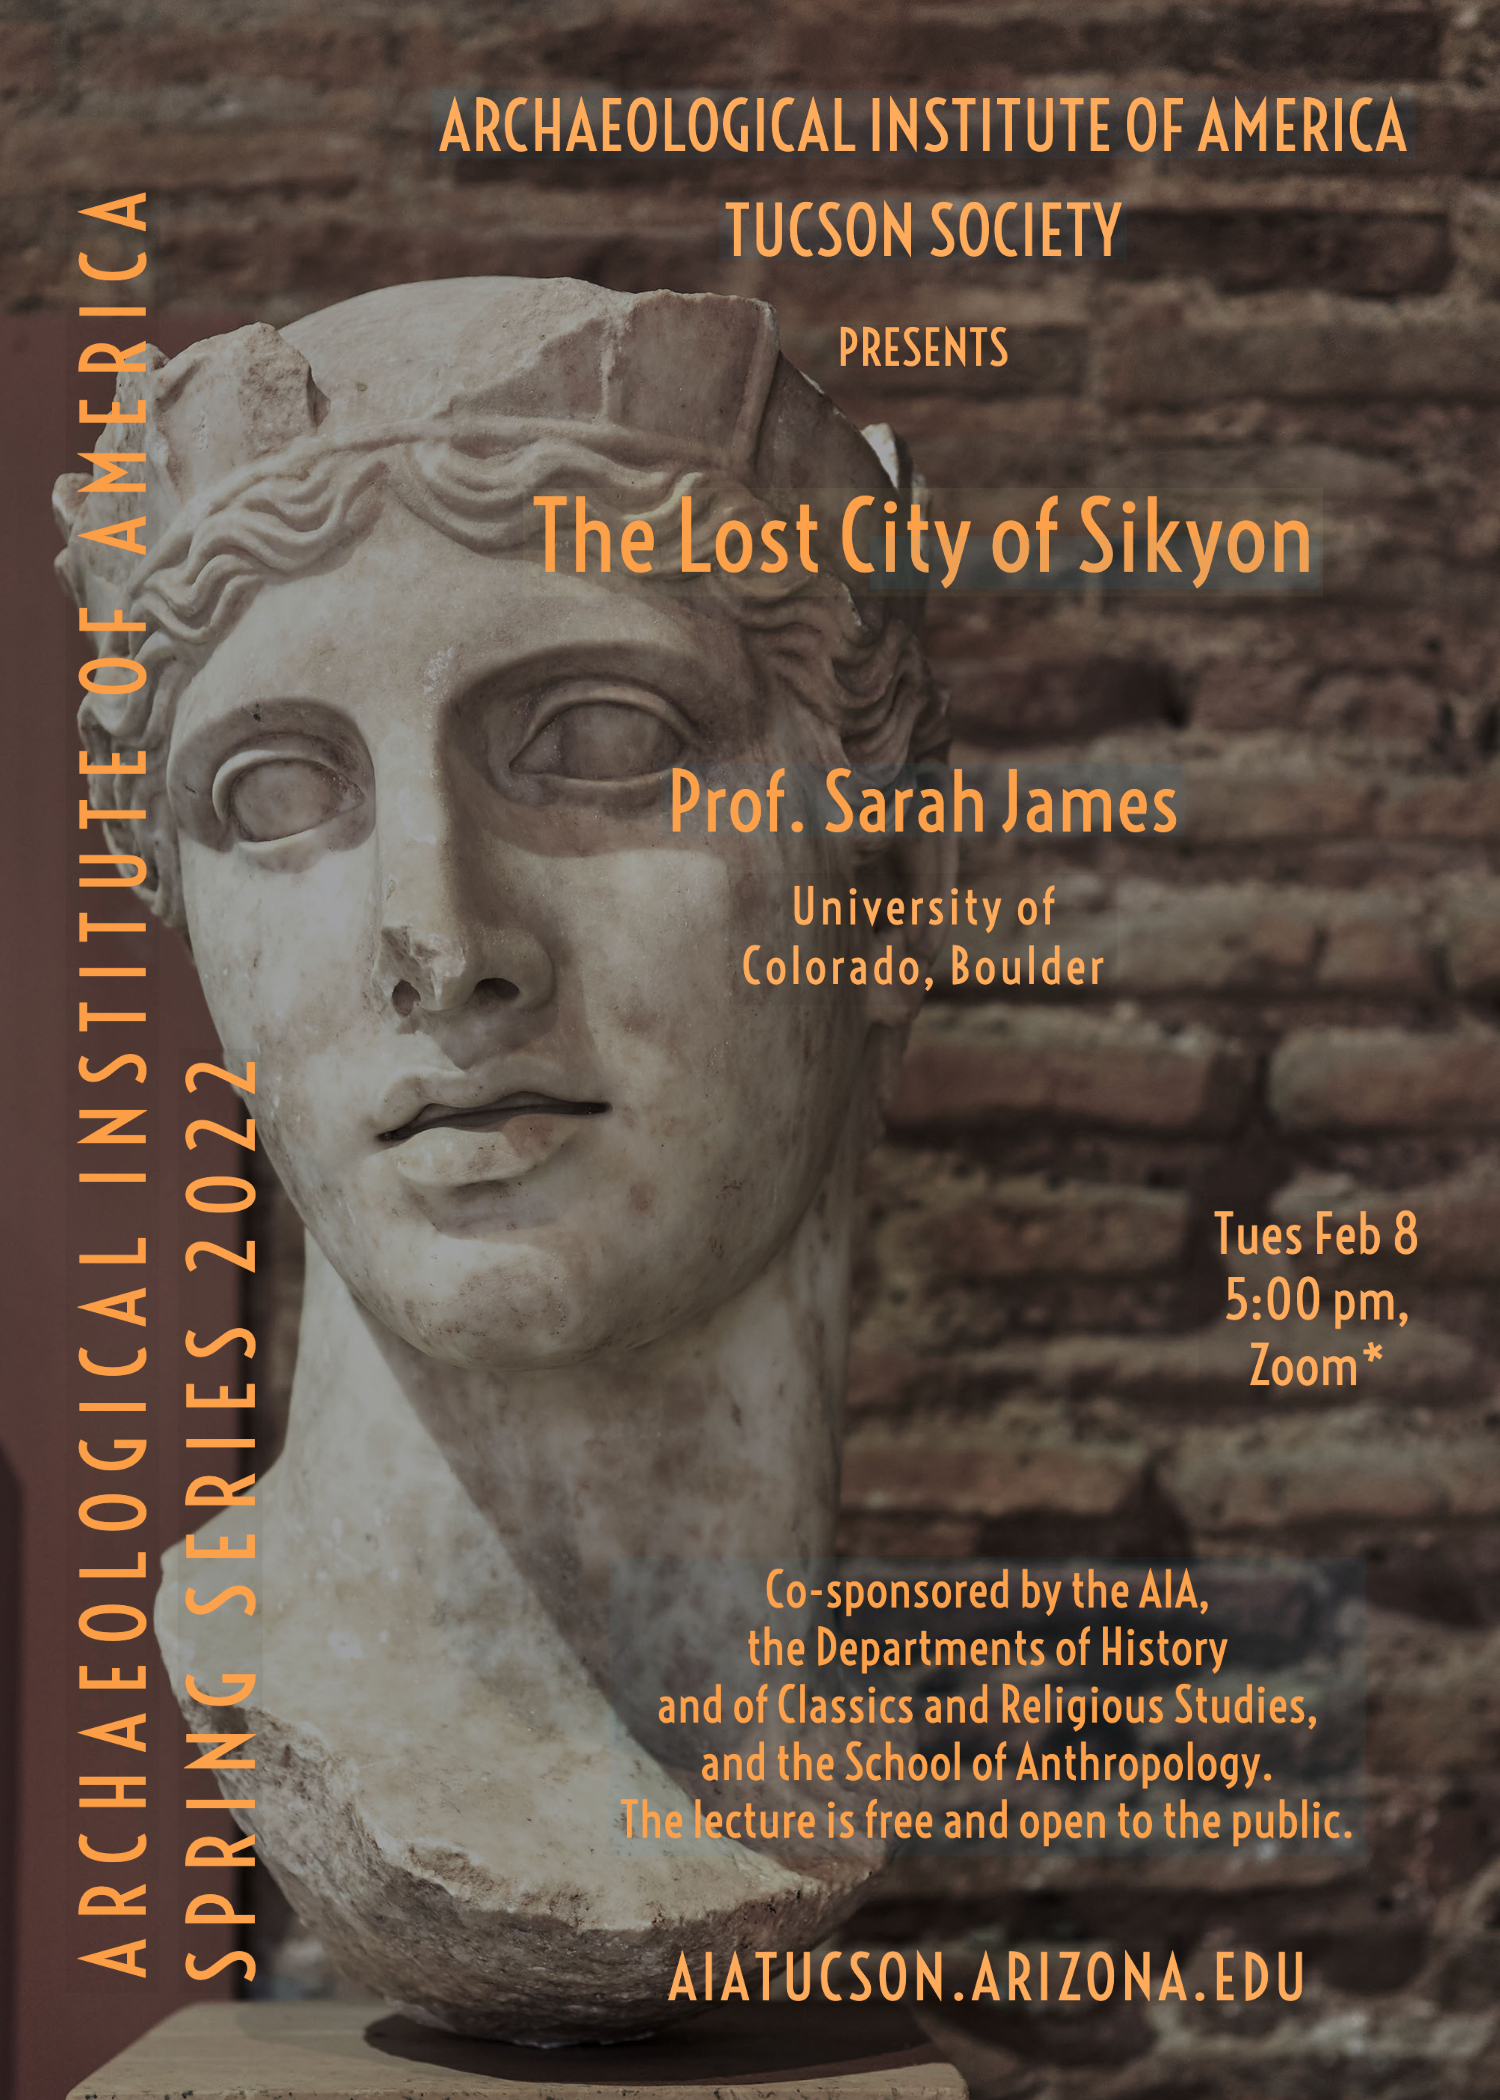 Lecture announcement poster with the head of a statue in front of a brick wall that reads: Archaeological Institute of America Tucson Society presents The Lost City of Sikyon. Prof. Sarah James. University of Colorado, Boulder. Tues Feb 8. 5:00PM. Zoom. AIATUCSON.Arizona.edu